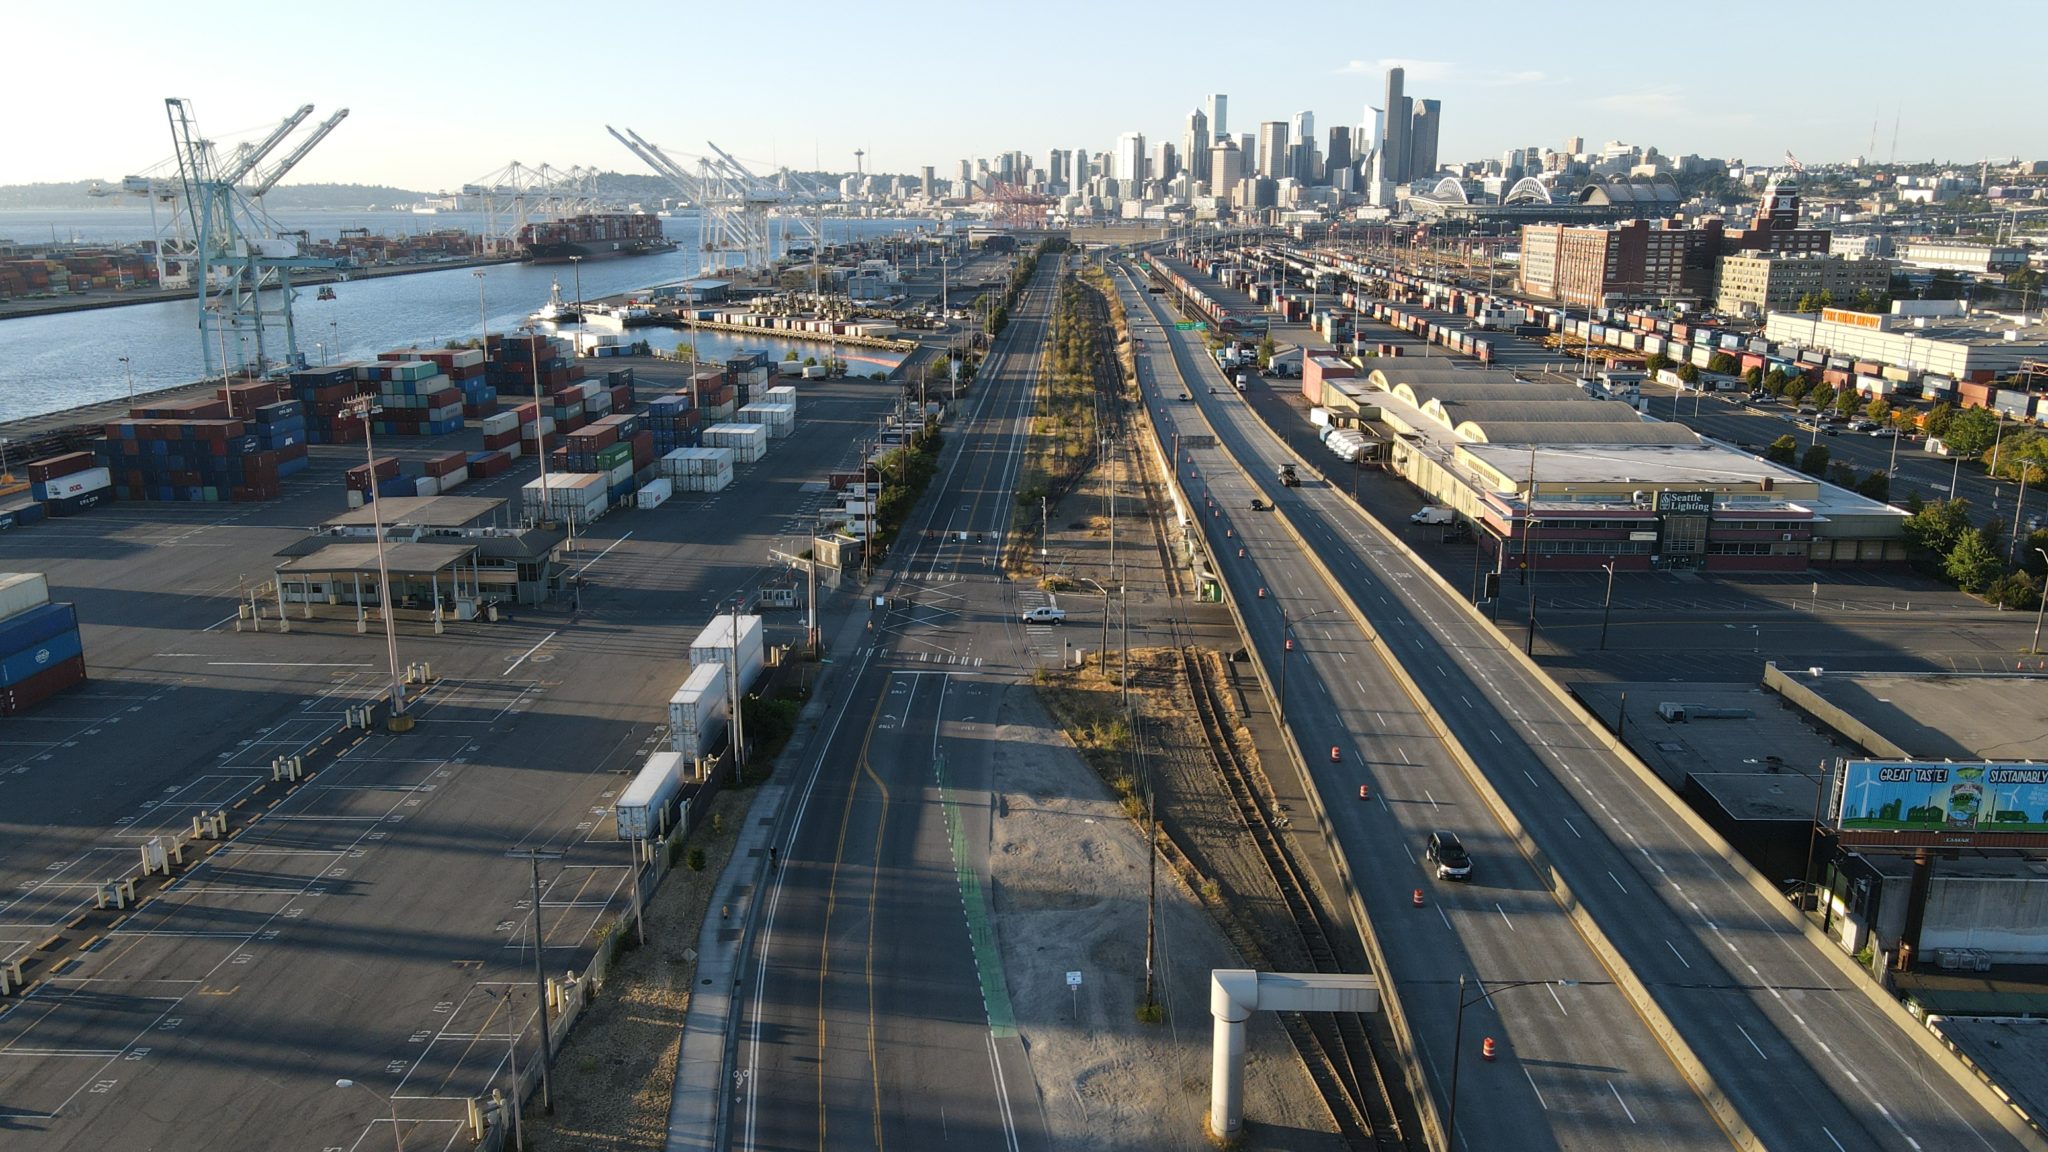 View of East Marginal Way S, looking north toward downtown Seattle. East Marginal Way S is a major freight corridor that provides access to the Port of Seattle terminals, rail yards, industrial businesses, and other local manufacturing and industrial centers in the area.